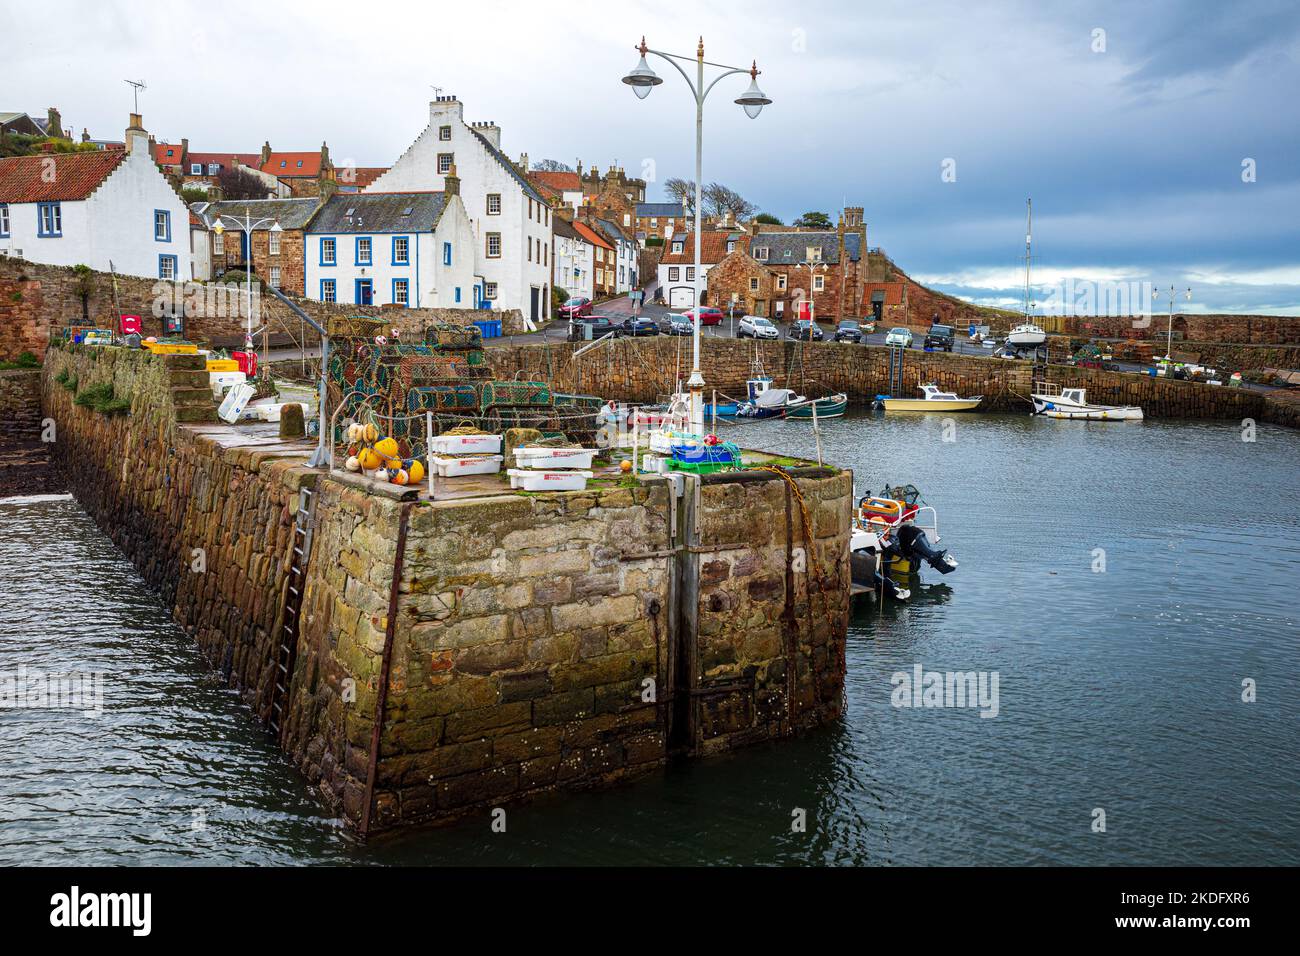 Crail Harbour, Fife, Scotland. Crail is a small fishing port East Neuk of Fife coast near St Andrews. Stock Photo